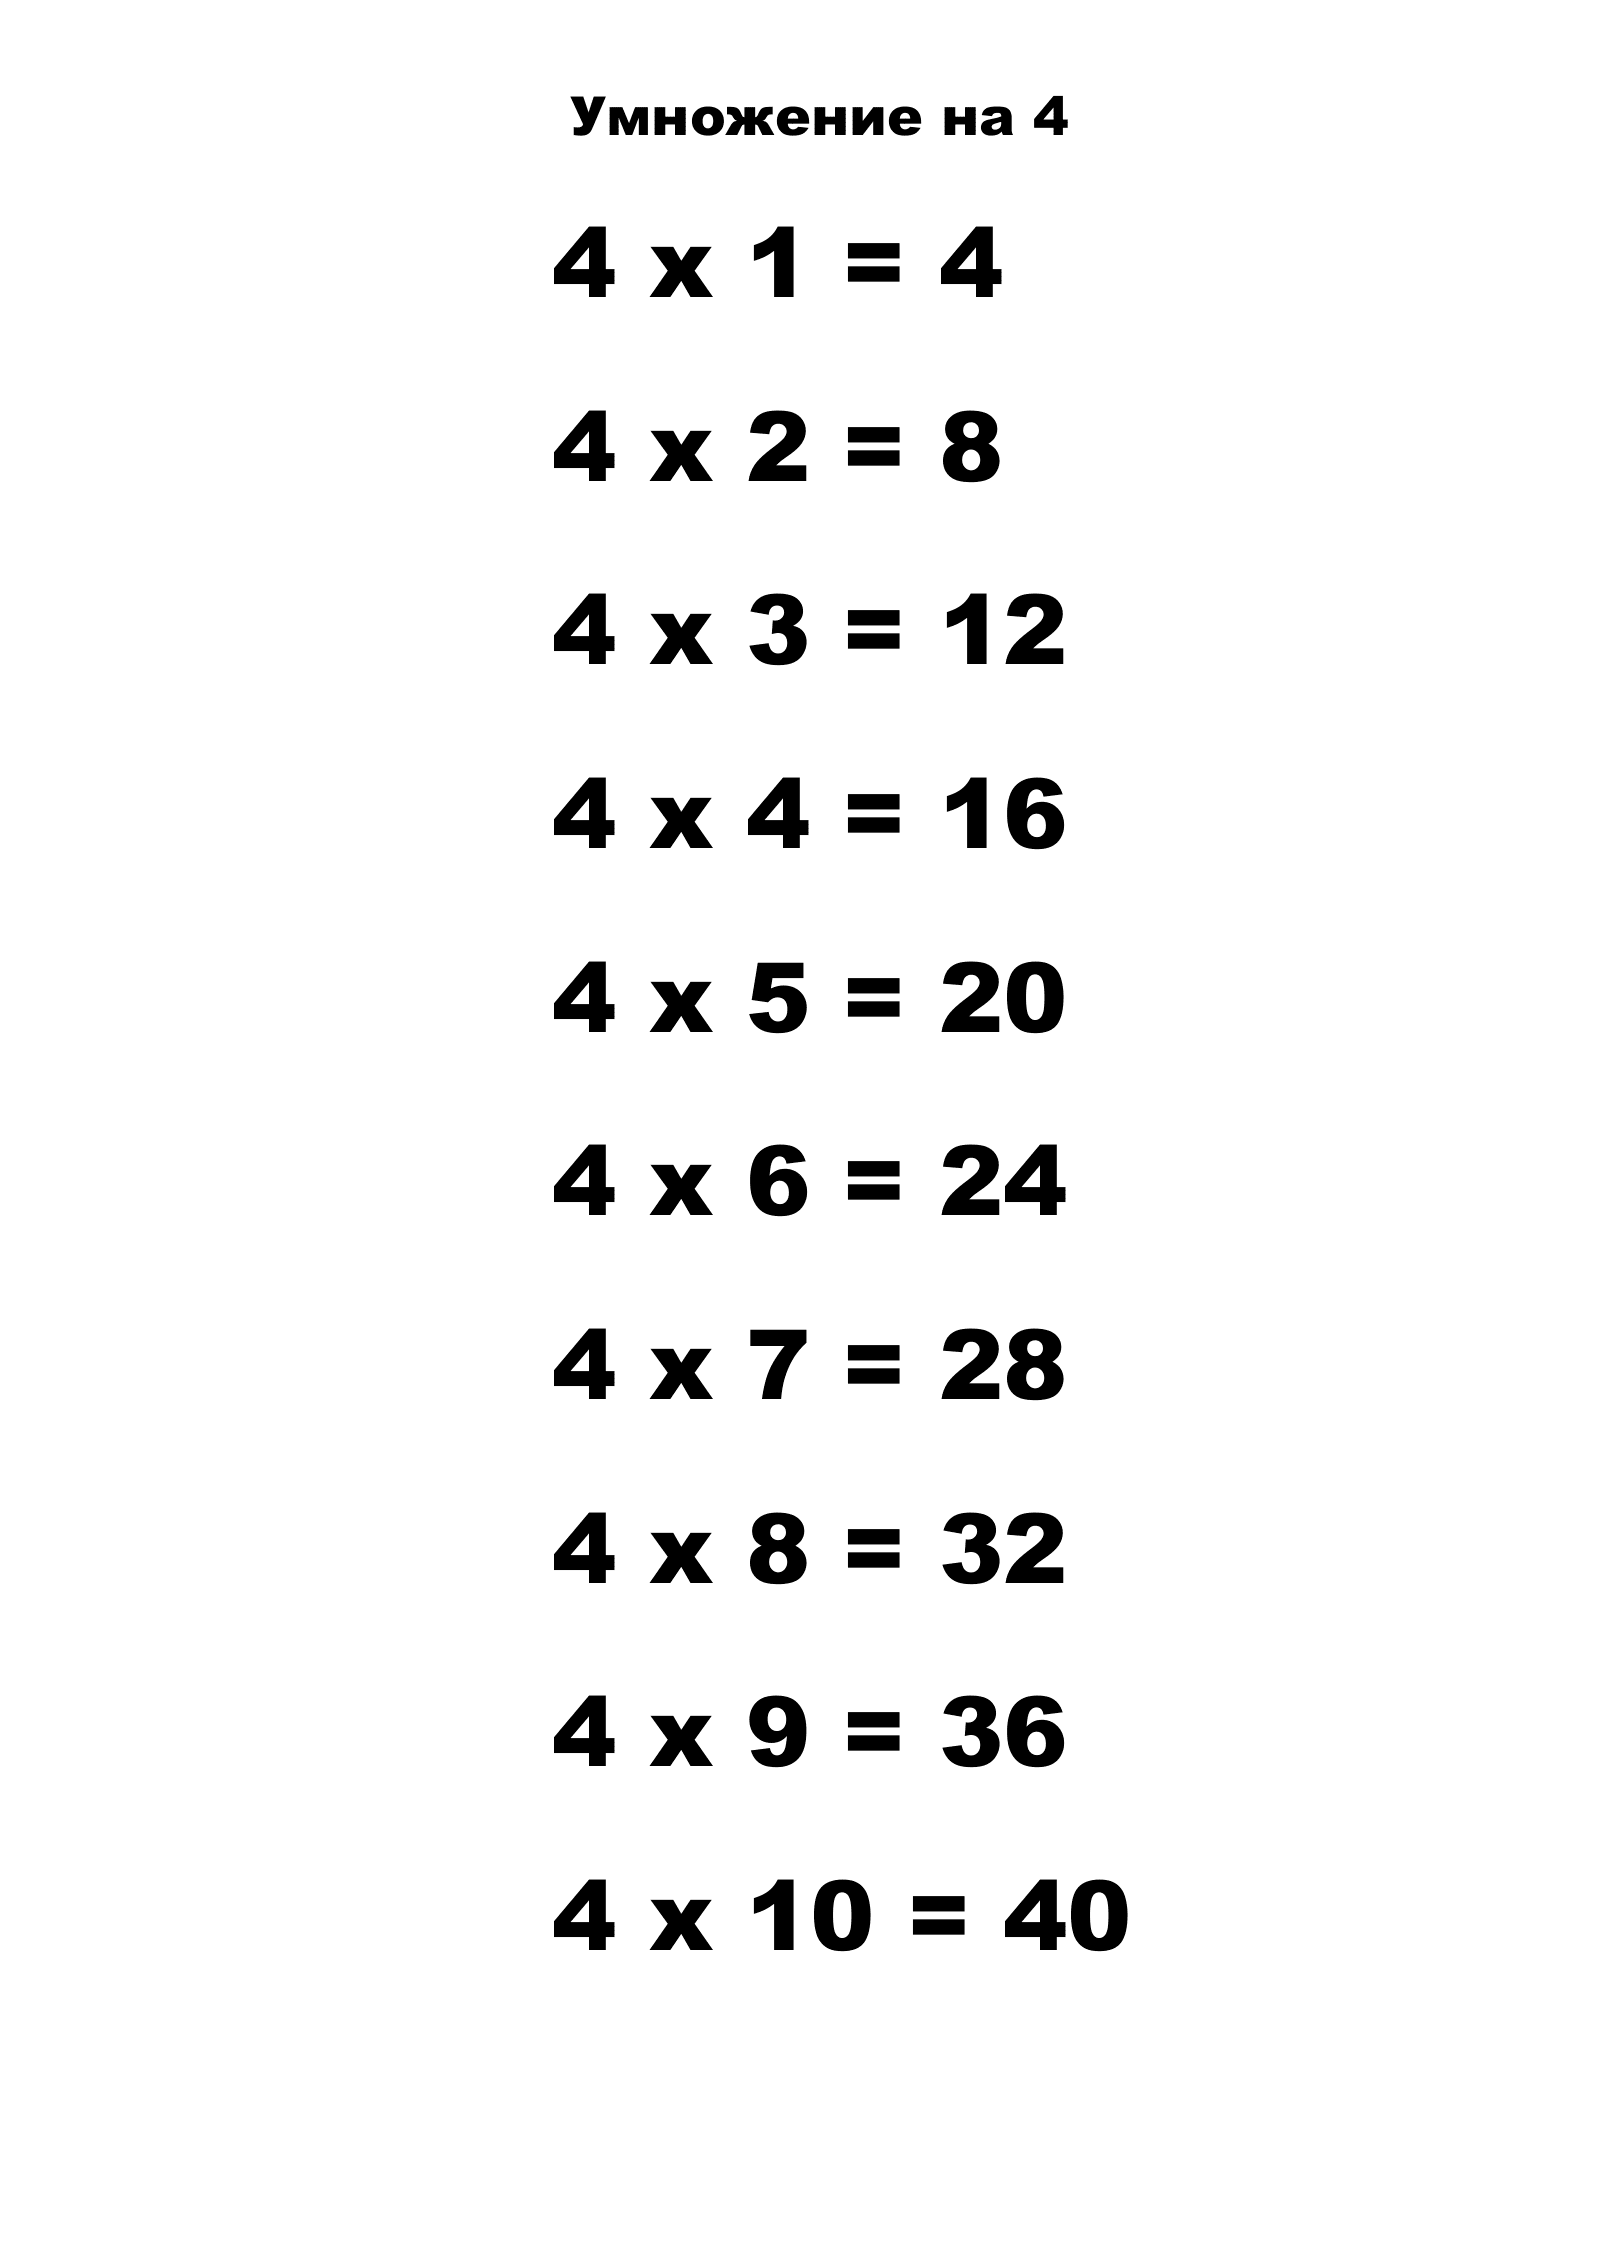 Multiplication Table for 4.